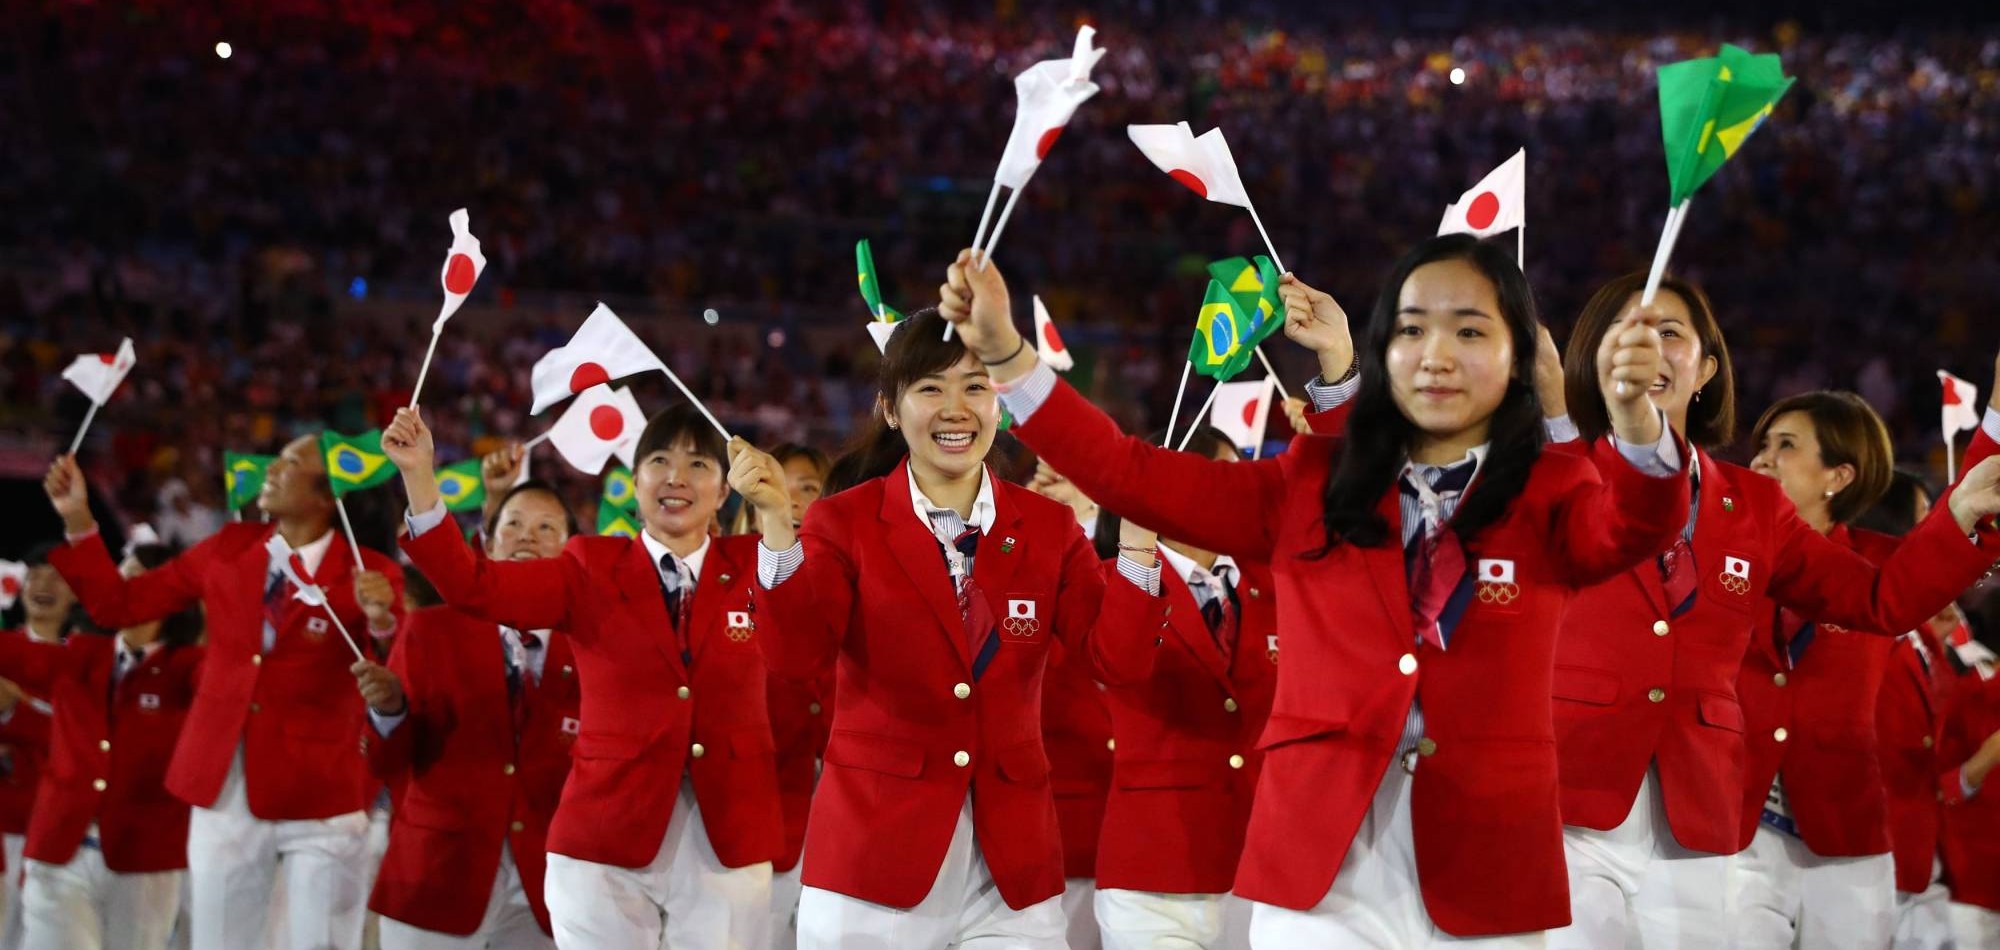 Hosts Japan end Tokyo 2020 with record medal haul